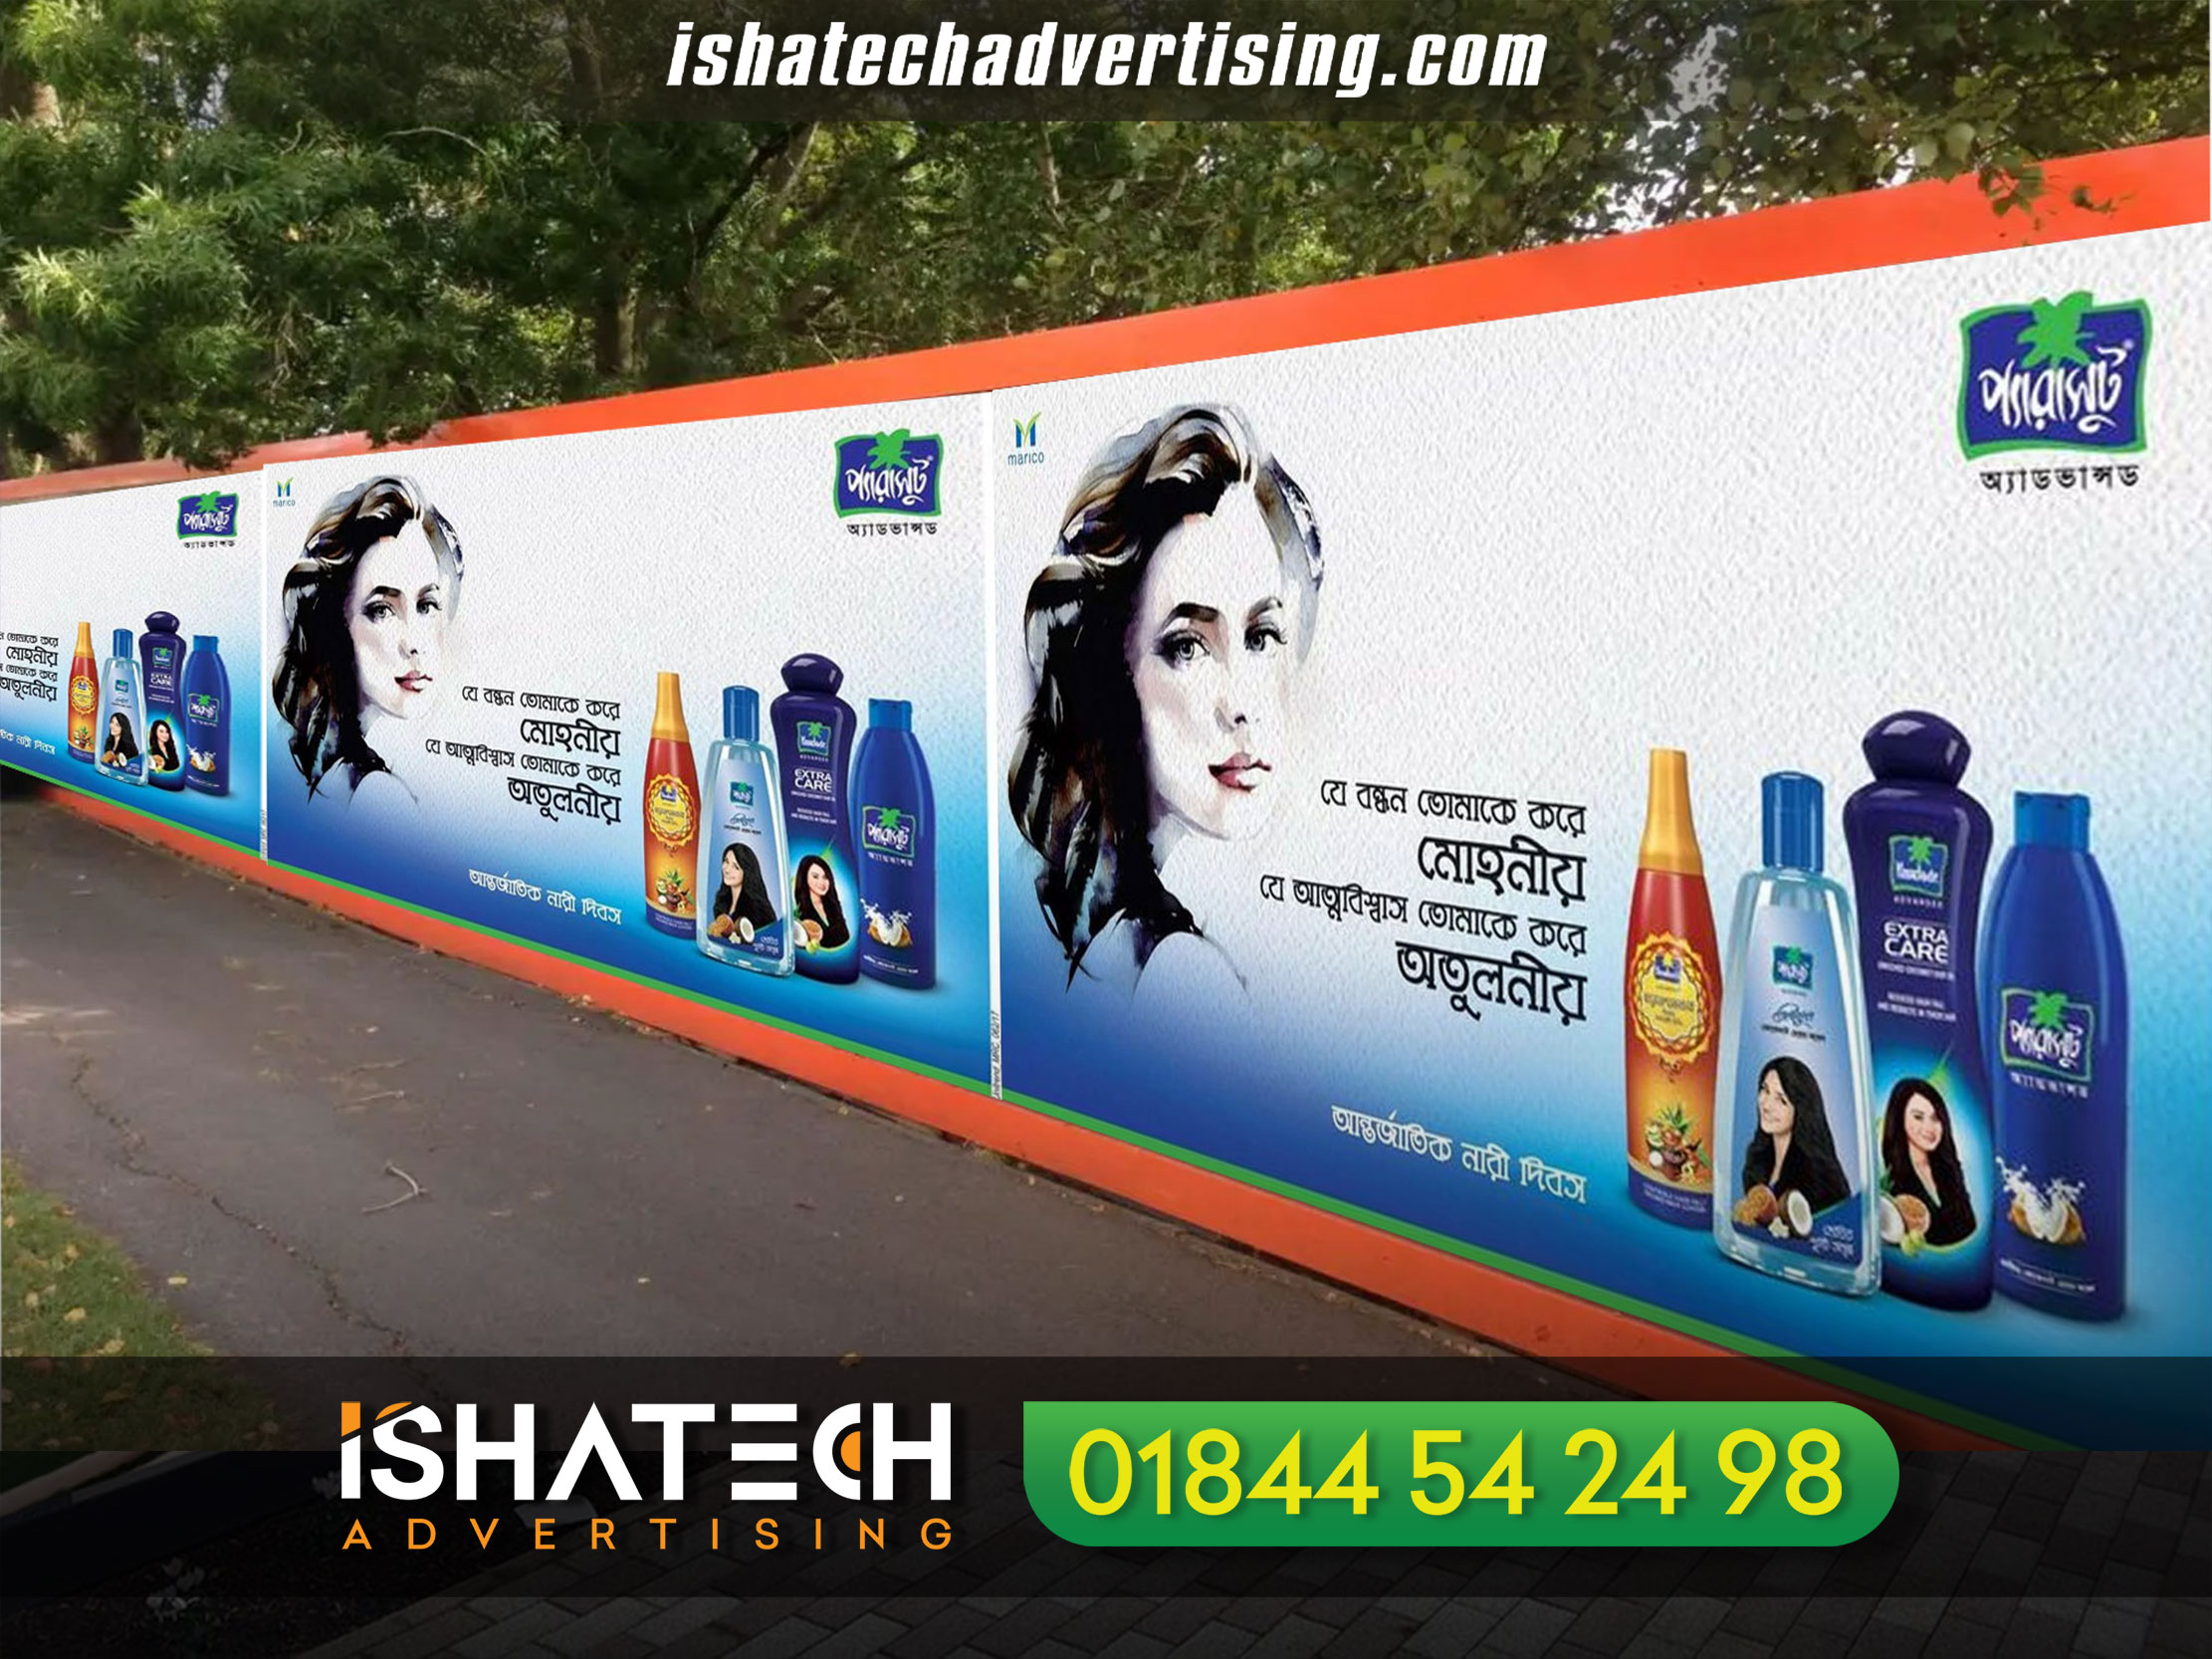 Wall Fence Boundary Design in Dhaka Bangladesh, boundary wall design in bangladesh, Category Archives: Project Boundary Wall Fence, Wall Boundary Acrylic Signage & Acp Sheet, Project Wall Lighting Boundary Fence. Fencing & Boundary Wall Work. Project Wall and Fence Boundary. Project Wall and Fence Boundary - Red Rose Ad - Red Rose Ad. Project Boundary Fence Wall... - IshaTech Advertising Ltd. Project Wall Boundary 3D Design SS Strip Material Fence Bo. Fence and Retaining Wall at Embassy of Bangladesh, The 10 Best Boundary Gate Design In Bangladesh Of 2021. sign board dhaka. sign board design in bangladesh. *real estate signboard making in dhaka bd. real estate sign board design. real estate dhaka. real estate bd. Top Sign Board Manufacturers in Dhaka - Motihari. Exclusive Signboard Maker in Dhaka. Best Signs Companies in Dhaka, Bangladesh. Road & Highway Billboard & Signboard Signage. AMP Building Name Plate Signage, Real Estate Name Plate. 3D Signage Maker in Dhaka - Bangladesh Ad | Free Ads.